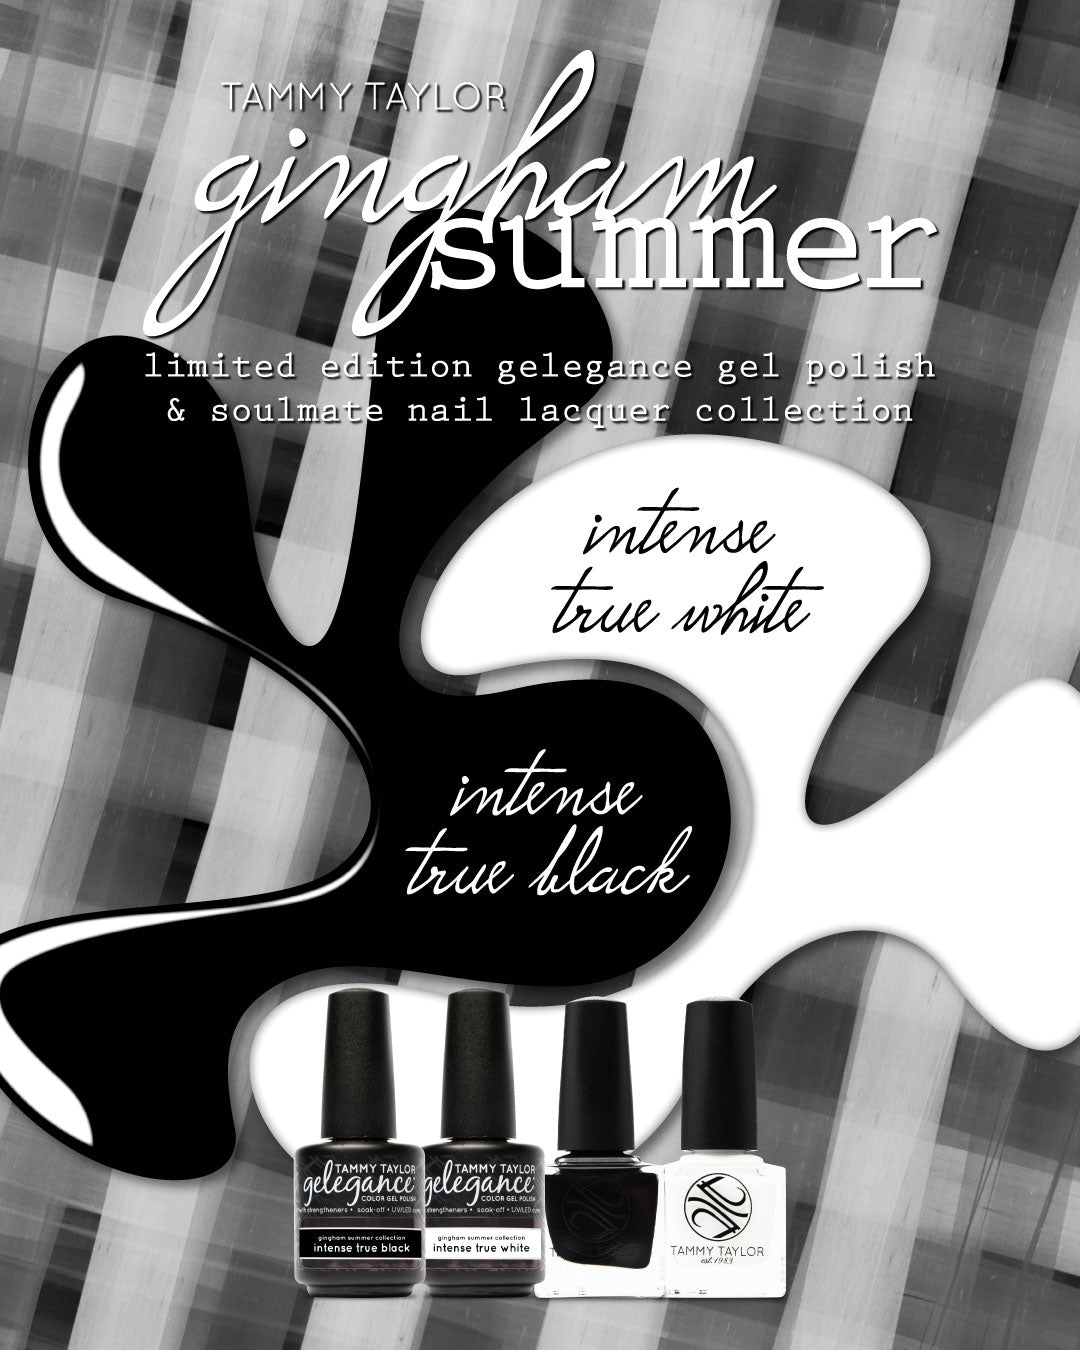 Tammy-Taylor-Gingham-Summer-Collection-IG-Slide-Ad-20240501-W1_ca094f20-a0cb-4f1a-bf4d-fb267271d62d.jpg